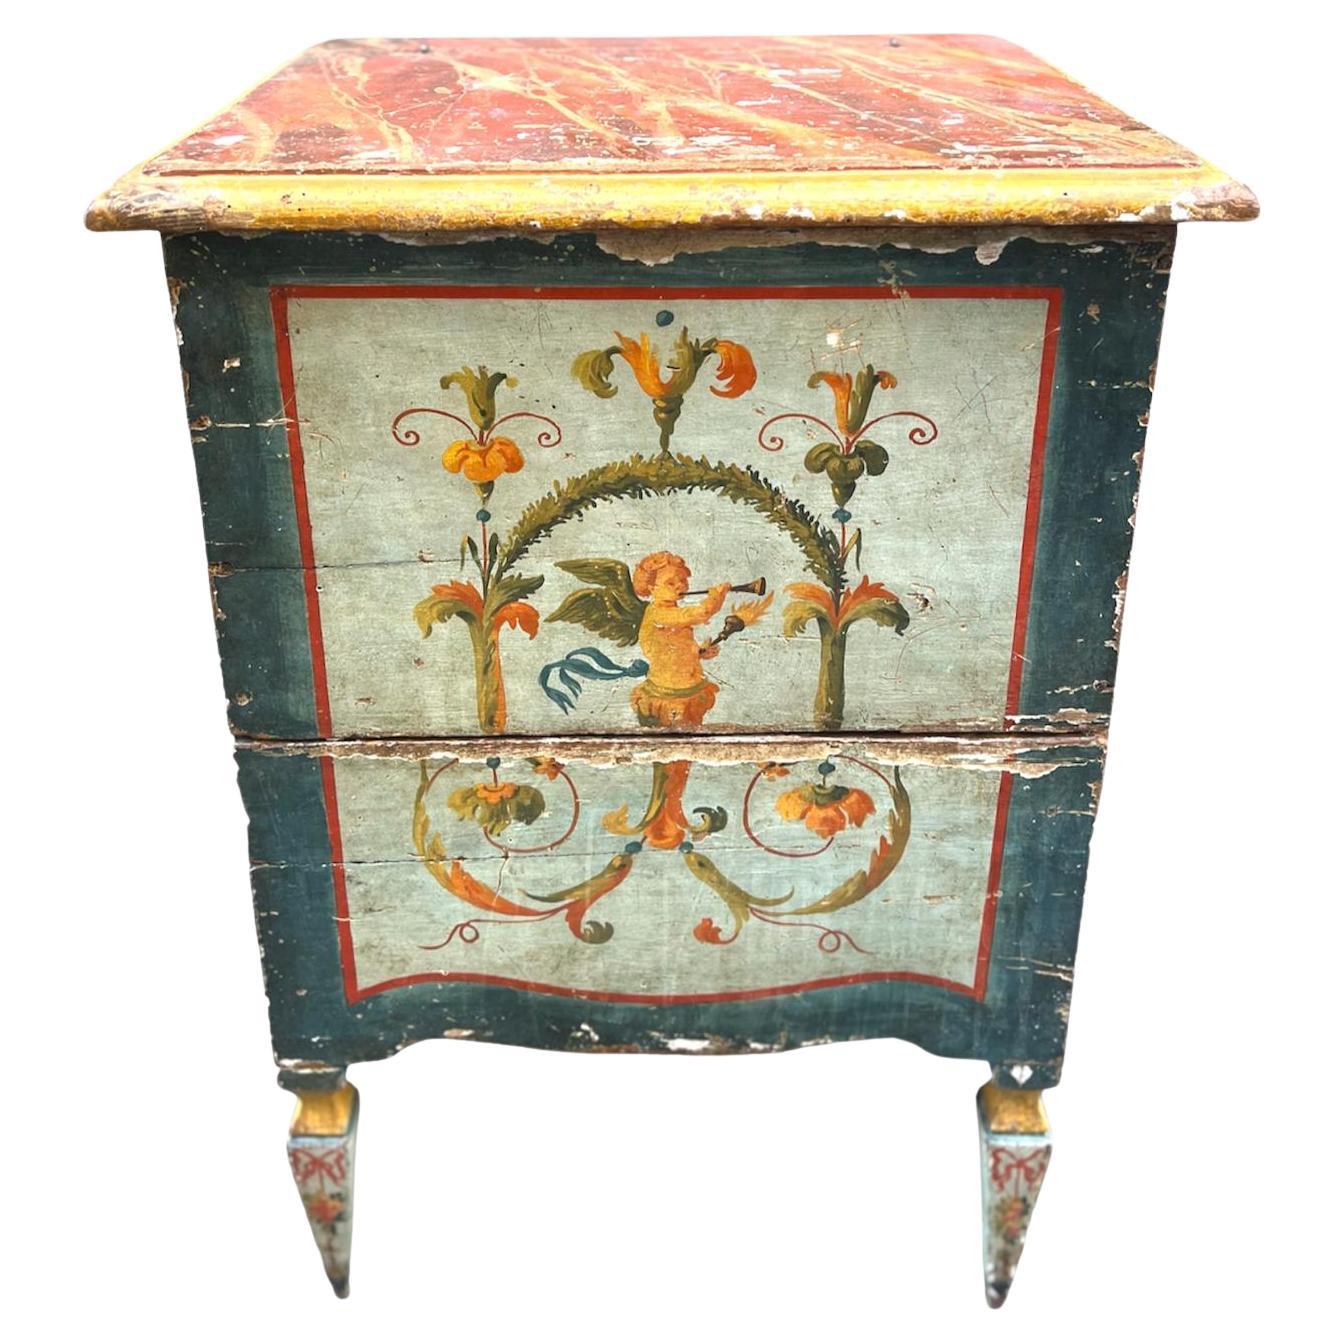 Bedside table painted with grotesques